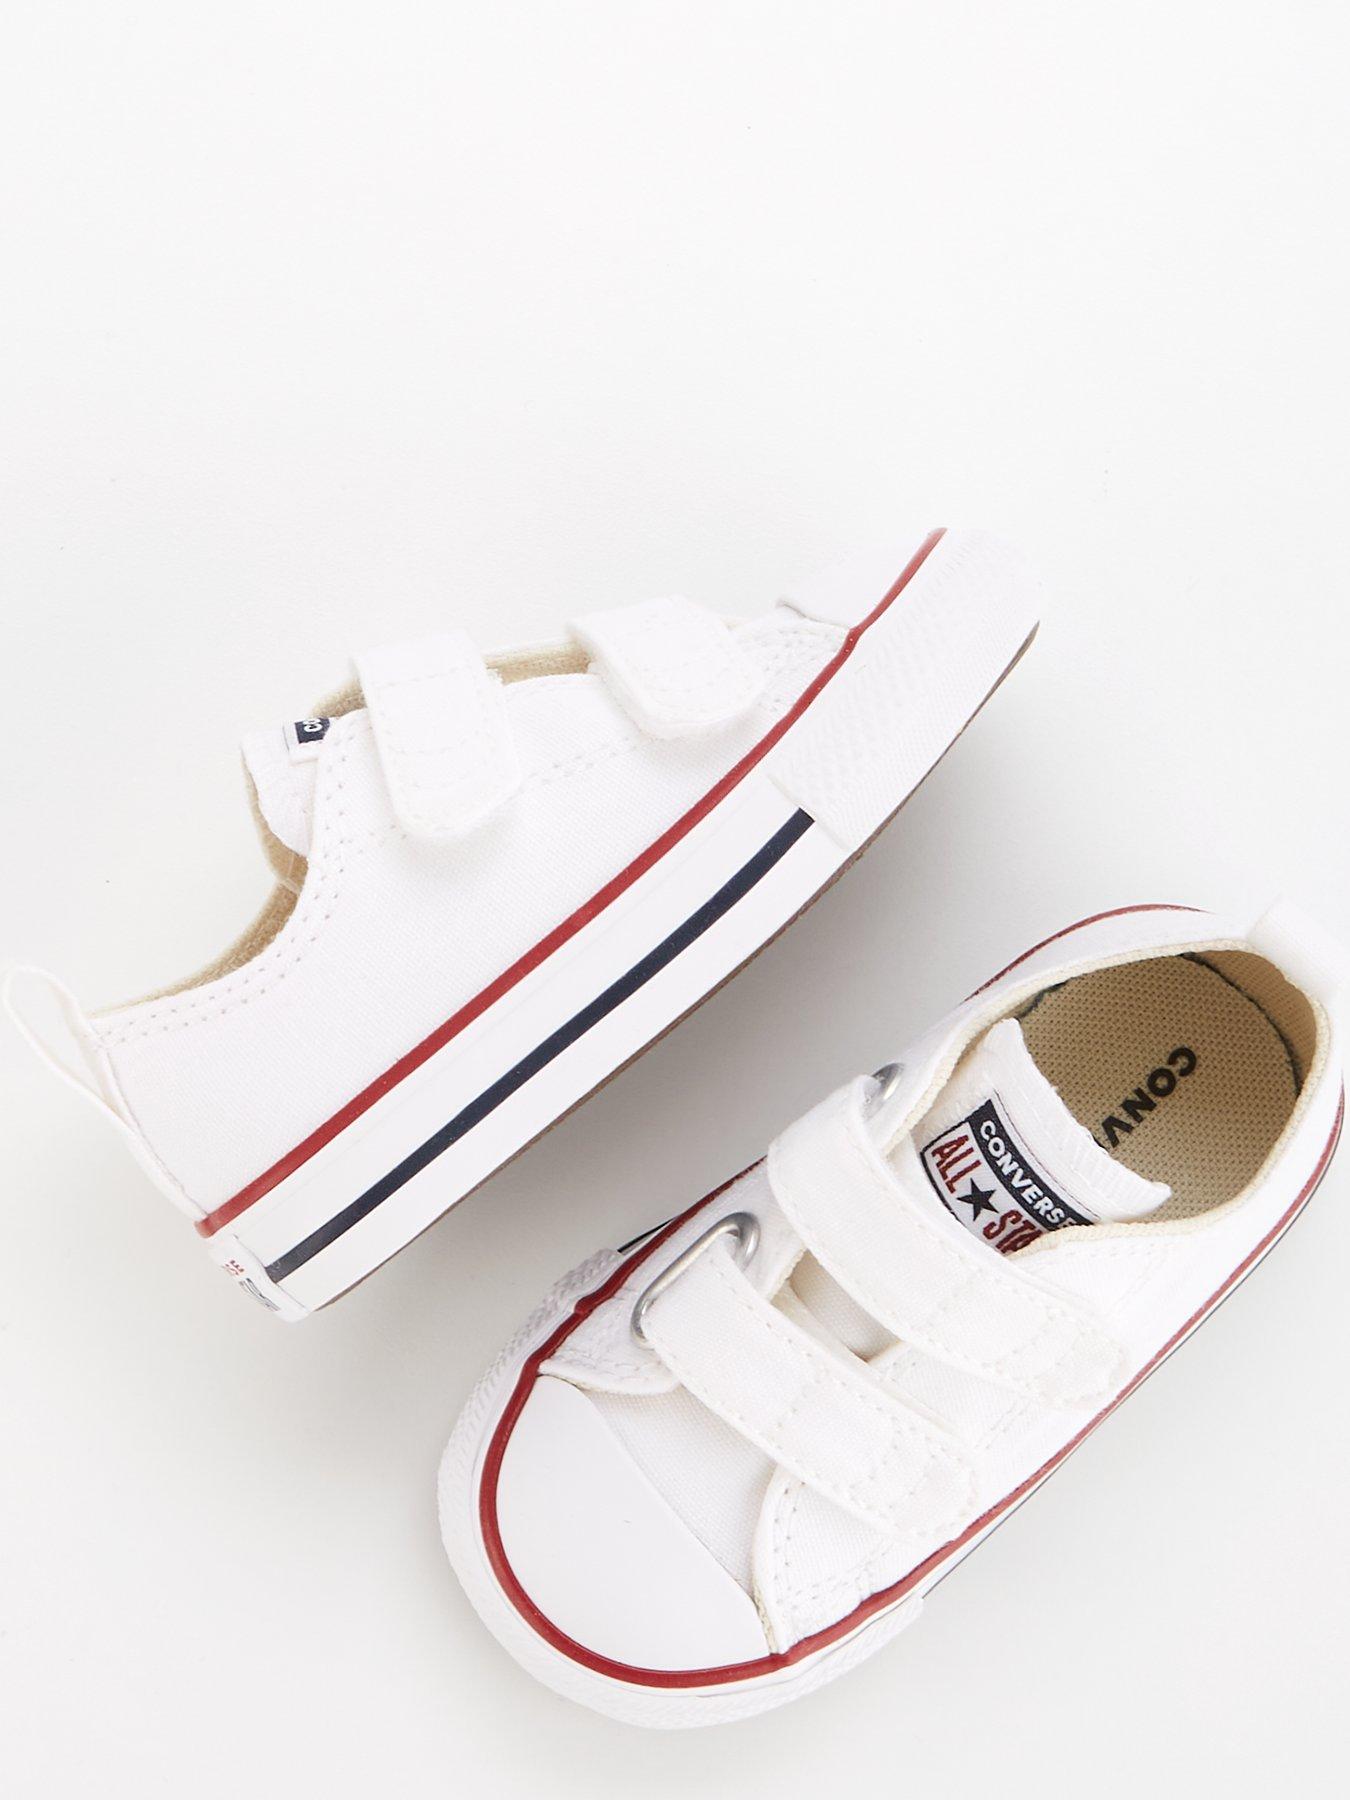 converse white & red all star 2v trainers toddler